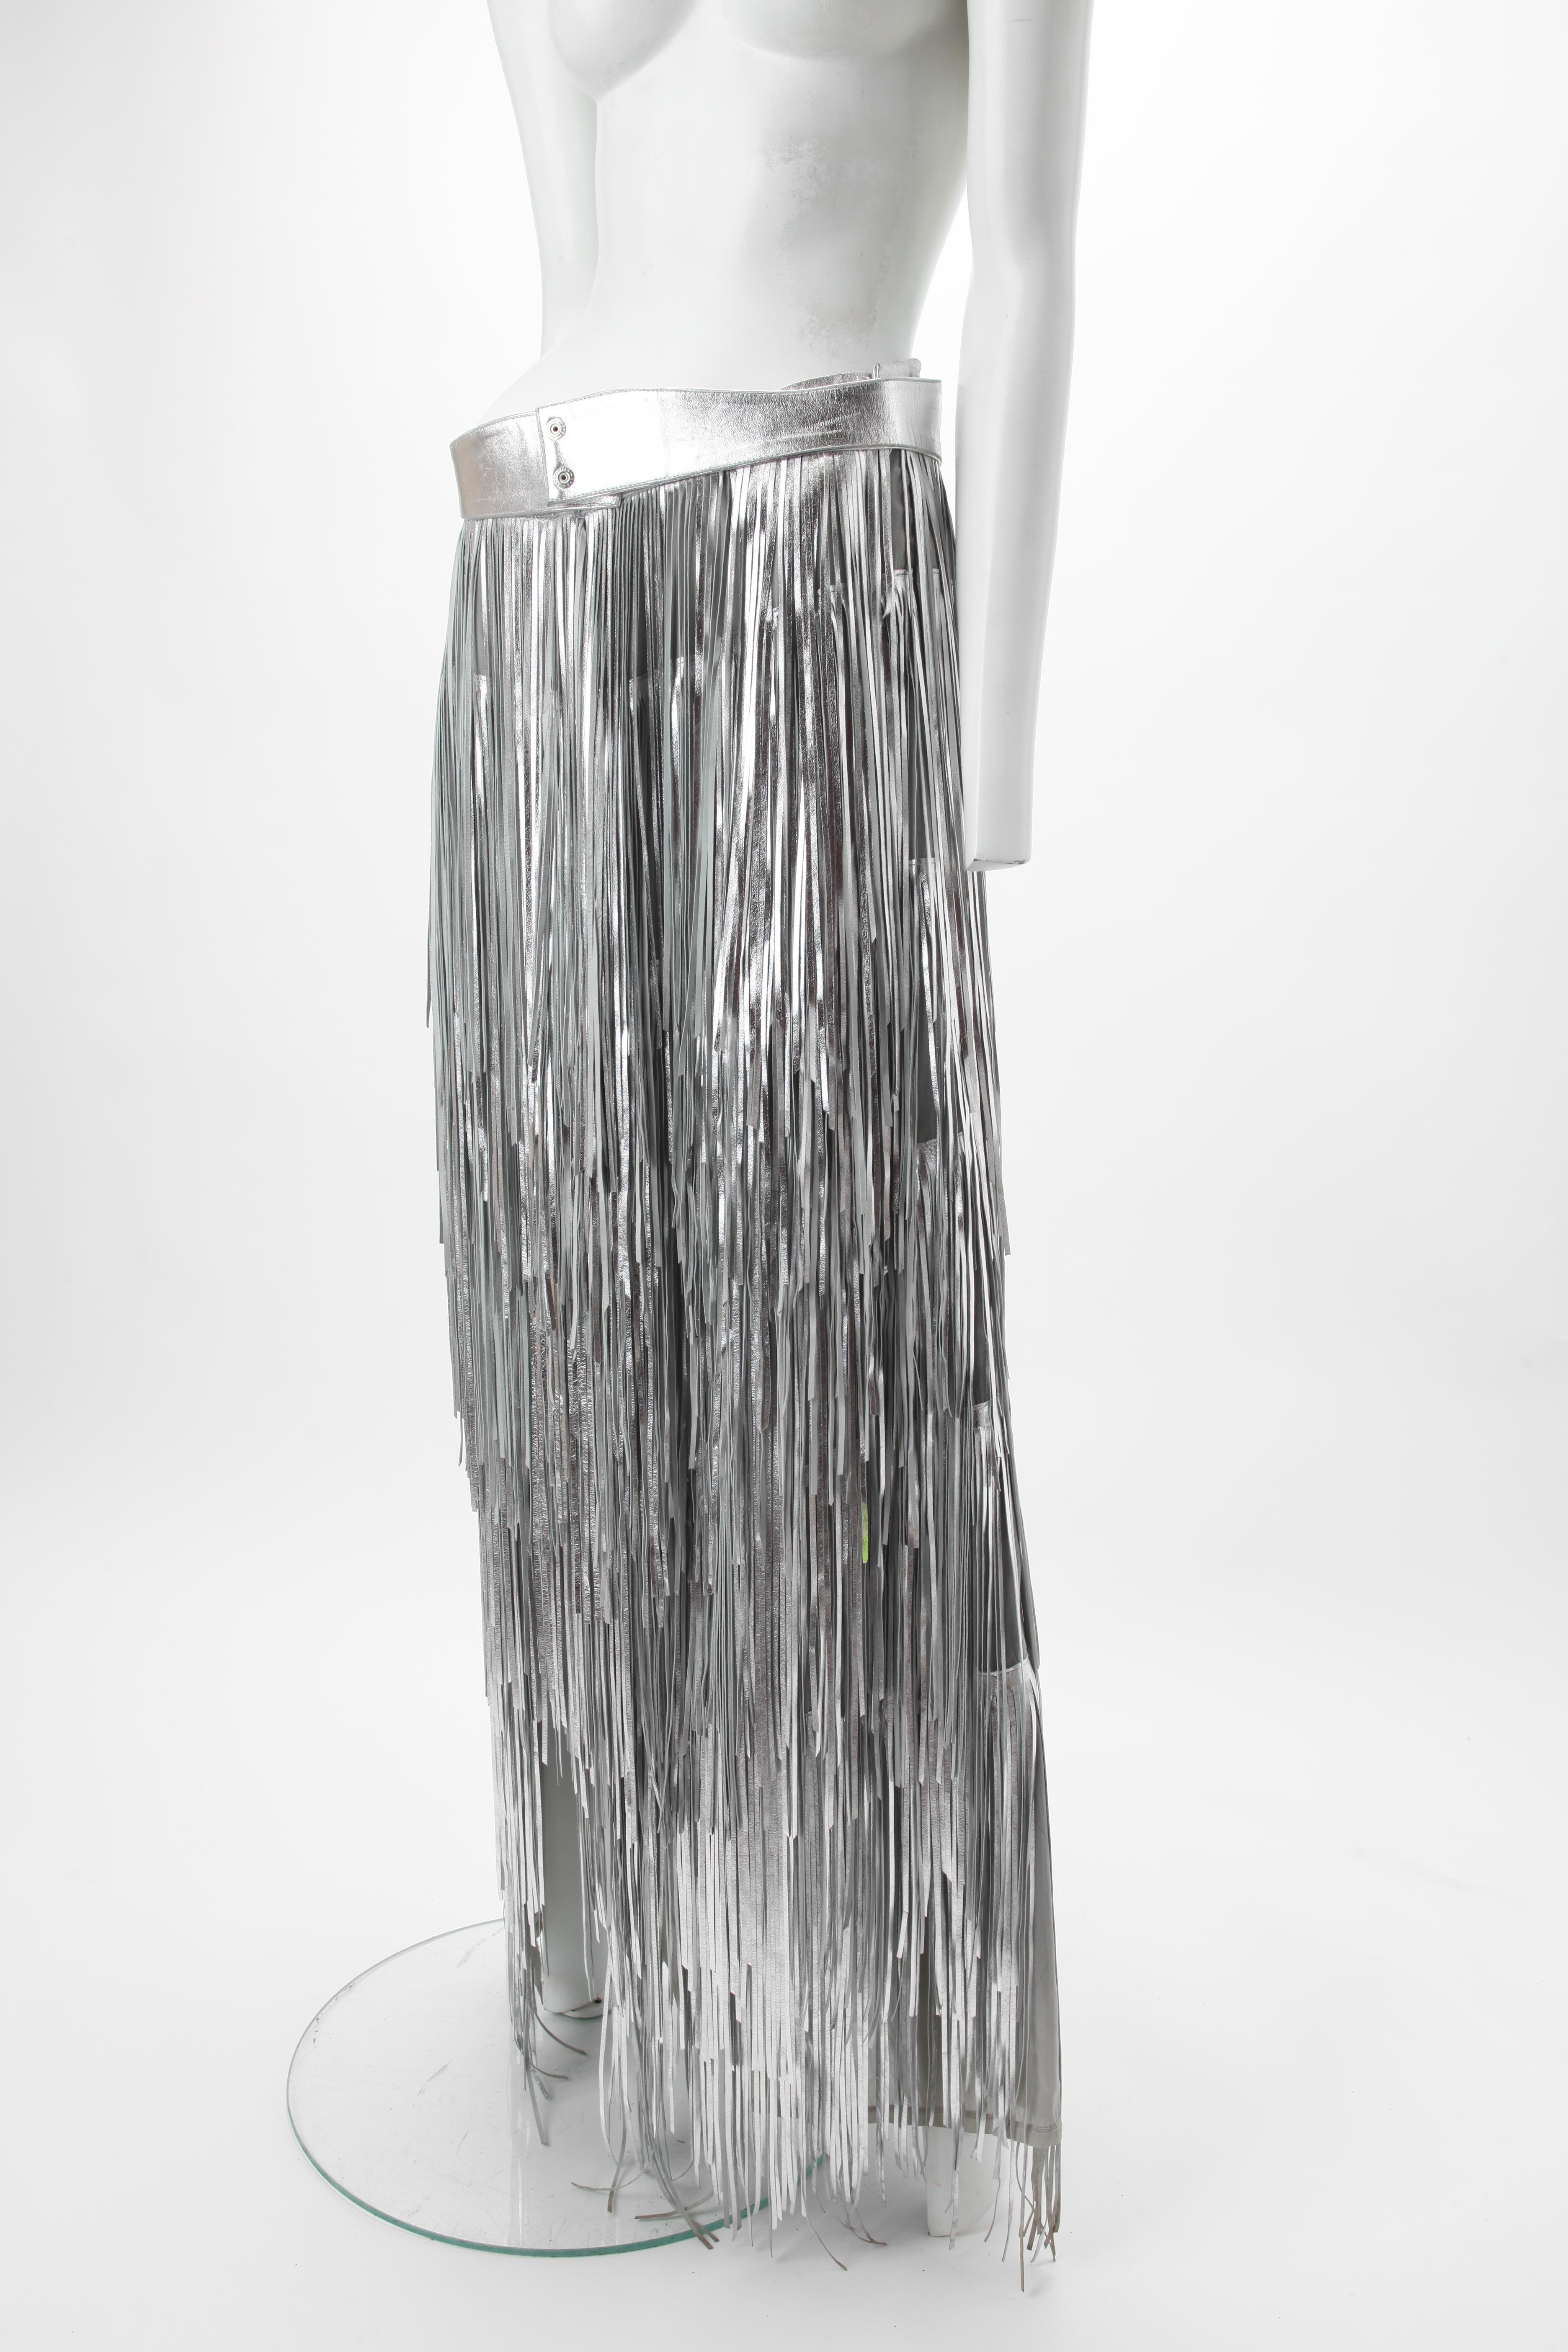 c.1980s Silver Leather Fringe Maxi Skirt, Western; Full length pencil skirt with tiered fringe; Side zipper fastening; Together with silver leather belt; Fully lined; Unlabeled. Fits US size 6